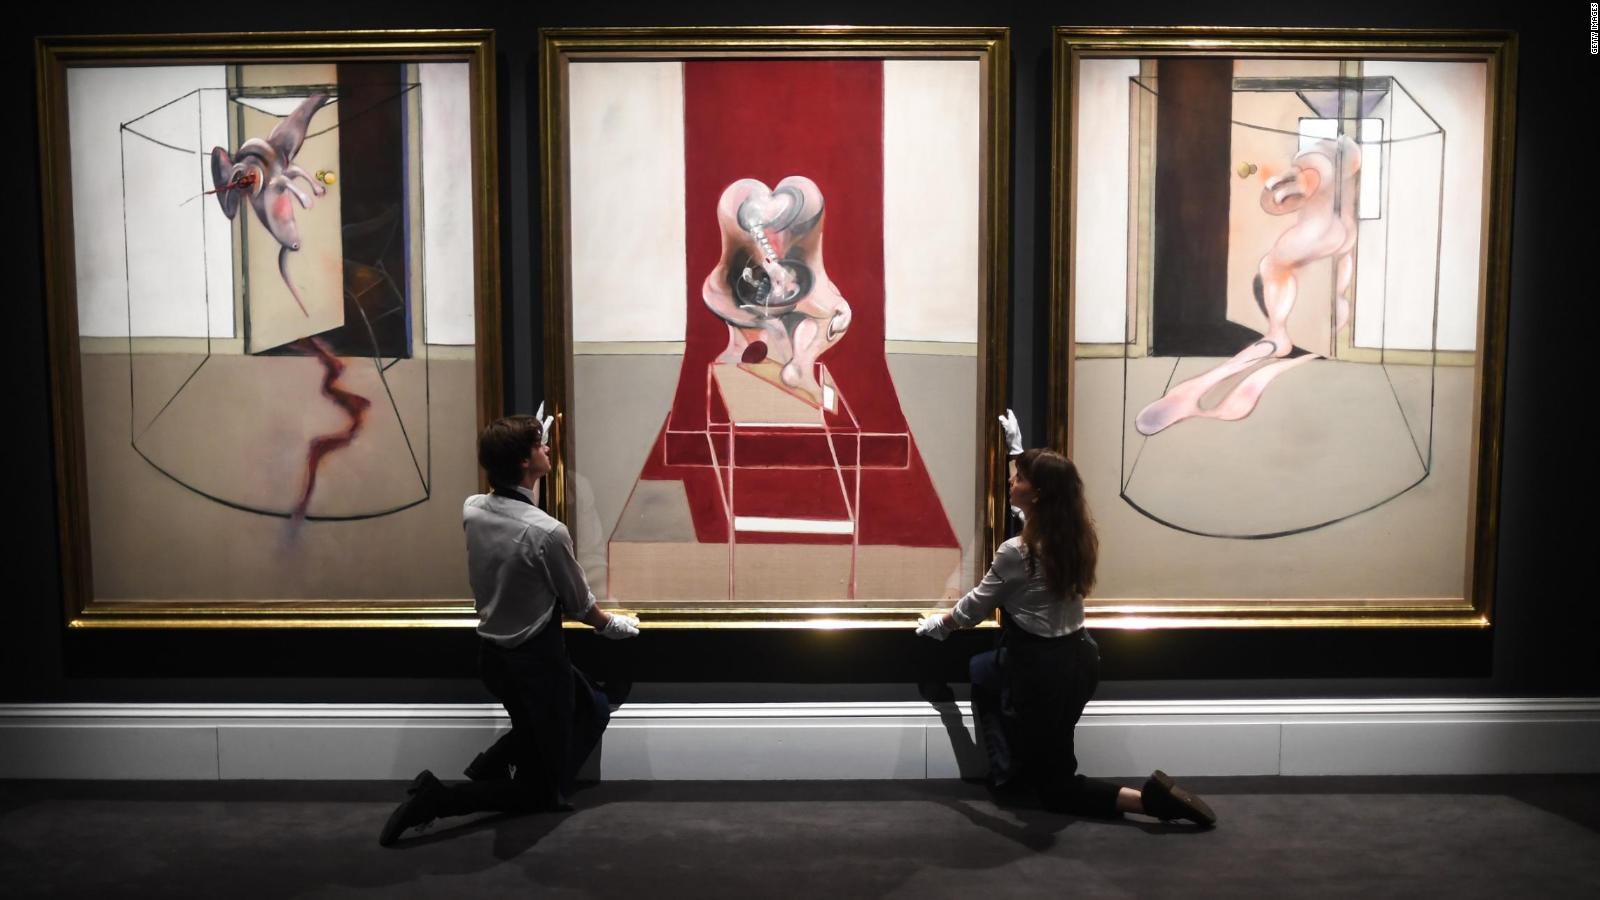 Francis Bacon painting sells for $11 million at surreal 